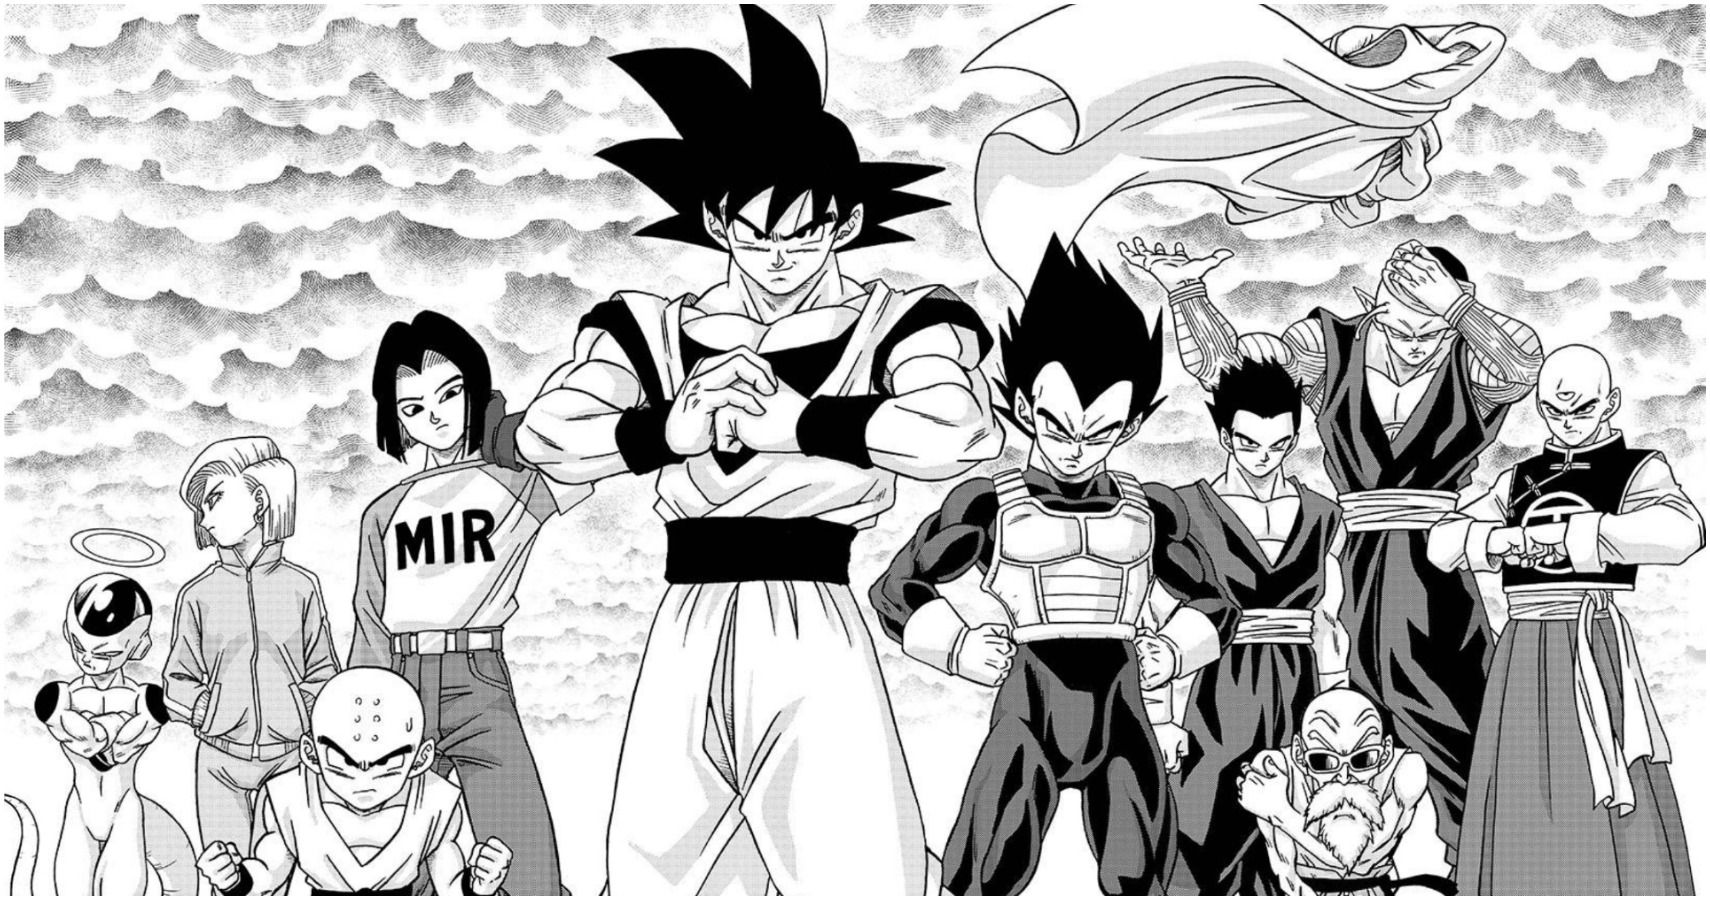 Dragon Ball Super Chapter 75 released on 18th of August. As anticipated, the chapter was a hit show. As the famous battle is to continue in the next chapter, a month break seems like a year to the fans. In this article, we will be talking about the release date  Release Date and Time of Dragon Ball Super Chapter 76 Dragon Ball super has been ruling the manga world for a long time now. After the successful release and great feedback of the chapter 75, chapter 76's date are also circulating and it is believed that the chapter will be releasing on September 18, 2021. However the timings differ according to the region.  Pacific Time of release is 9 AM on Saturday, September 18. Where as Central Time is 11 AM, Eastern Time is Noon and British Time is 5 PM. Where to read Dragon Ball Super Chapter 76 Akira Toriyama and Toyotarou's Dragon Ball Super will be releasing the chapter after a months' gap due to its monthly release schedule. After an intense and deadly battle between Vegeta and Granola, the fans are already hyped up. In the last chapter, after Vegeta's performance, we saw granola Evolving as well. This change has created a stir among the readers.  VIZ.COM MANGA PLUS SHONEN JUMP APP ANDROID These are some official websites you can visit to enjoy the chapters of the manga.  Stay with EveDonus Films for the latest updates.